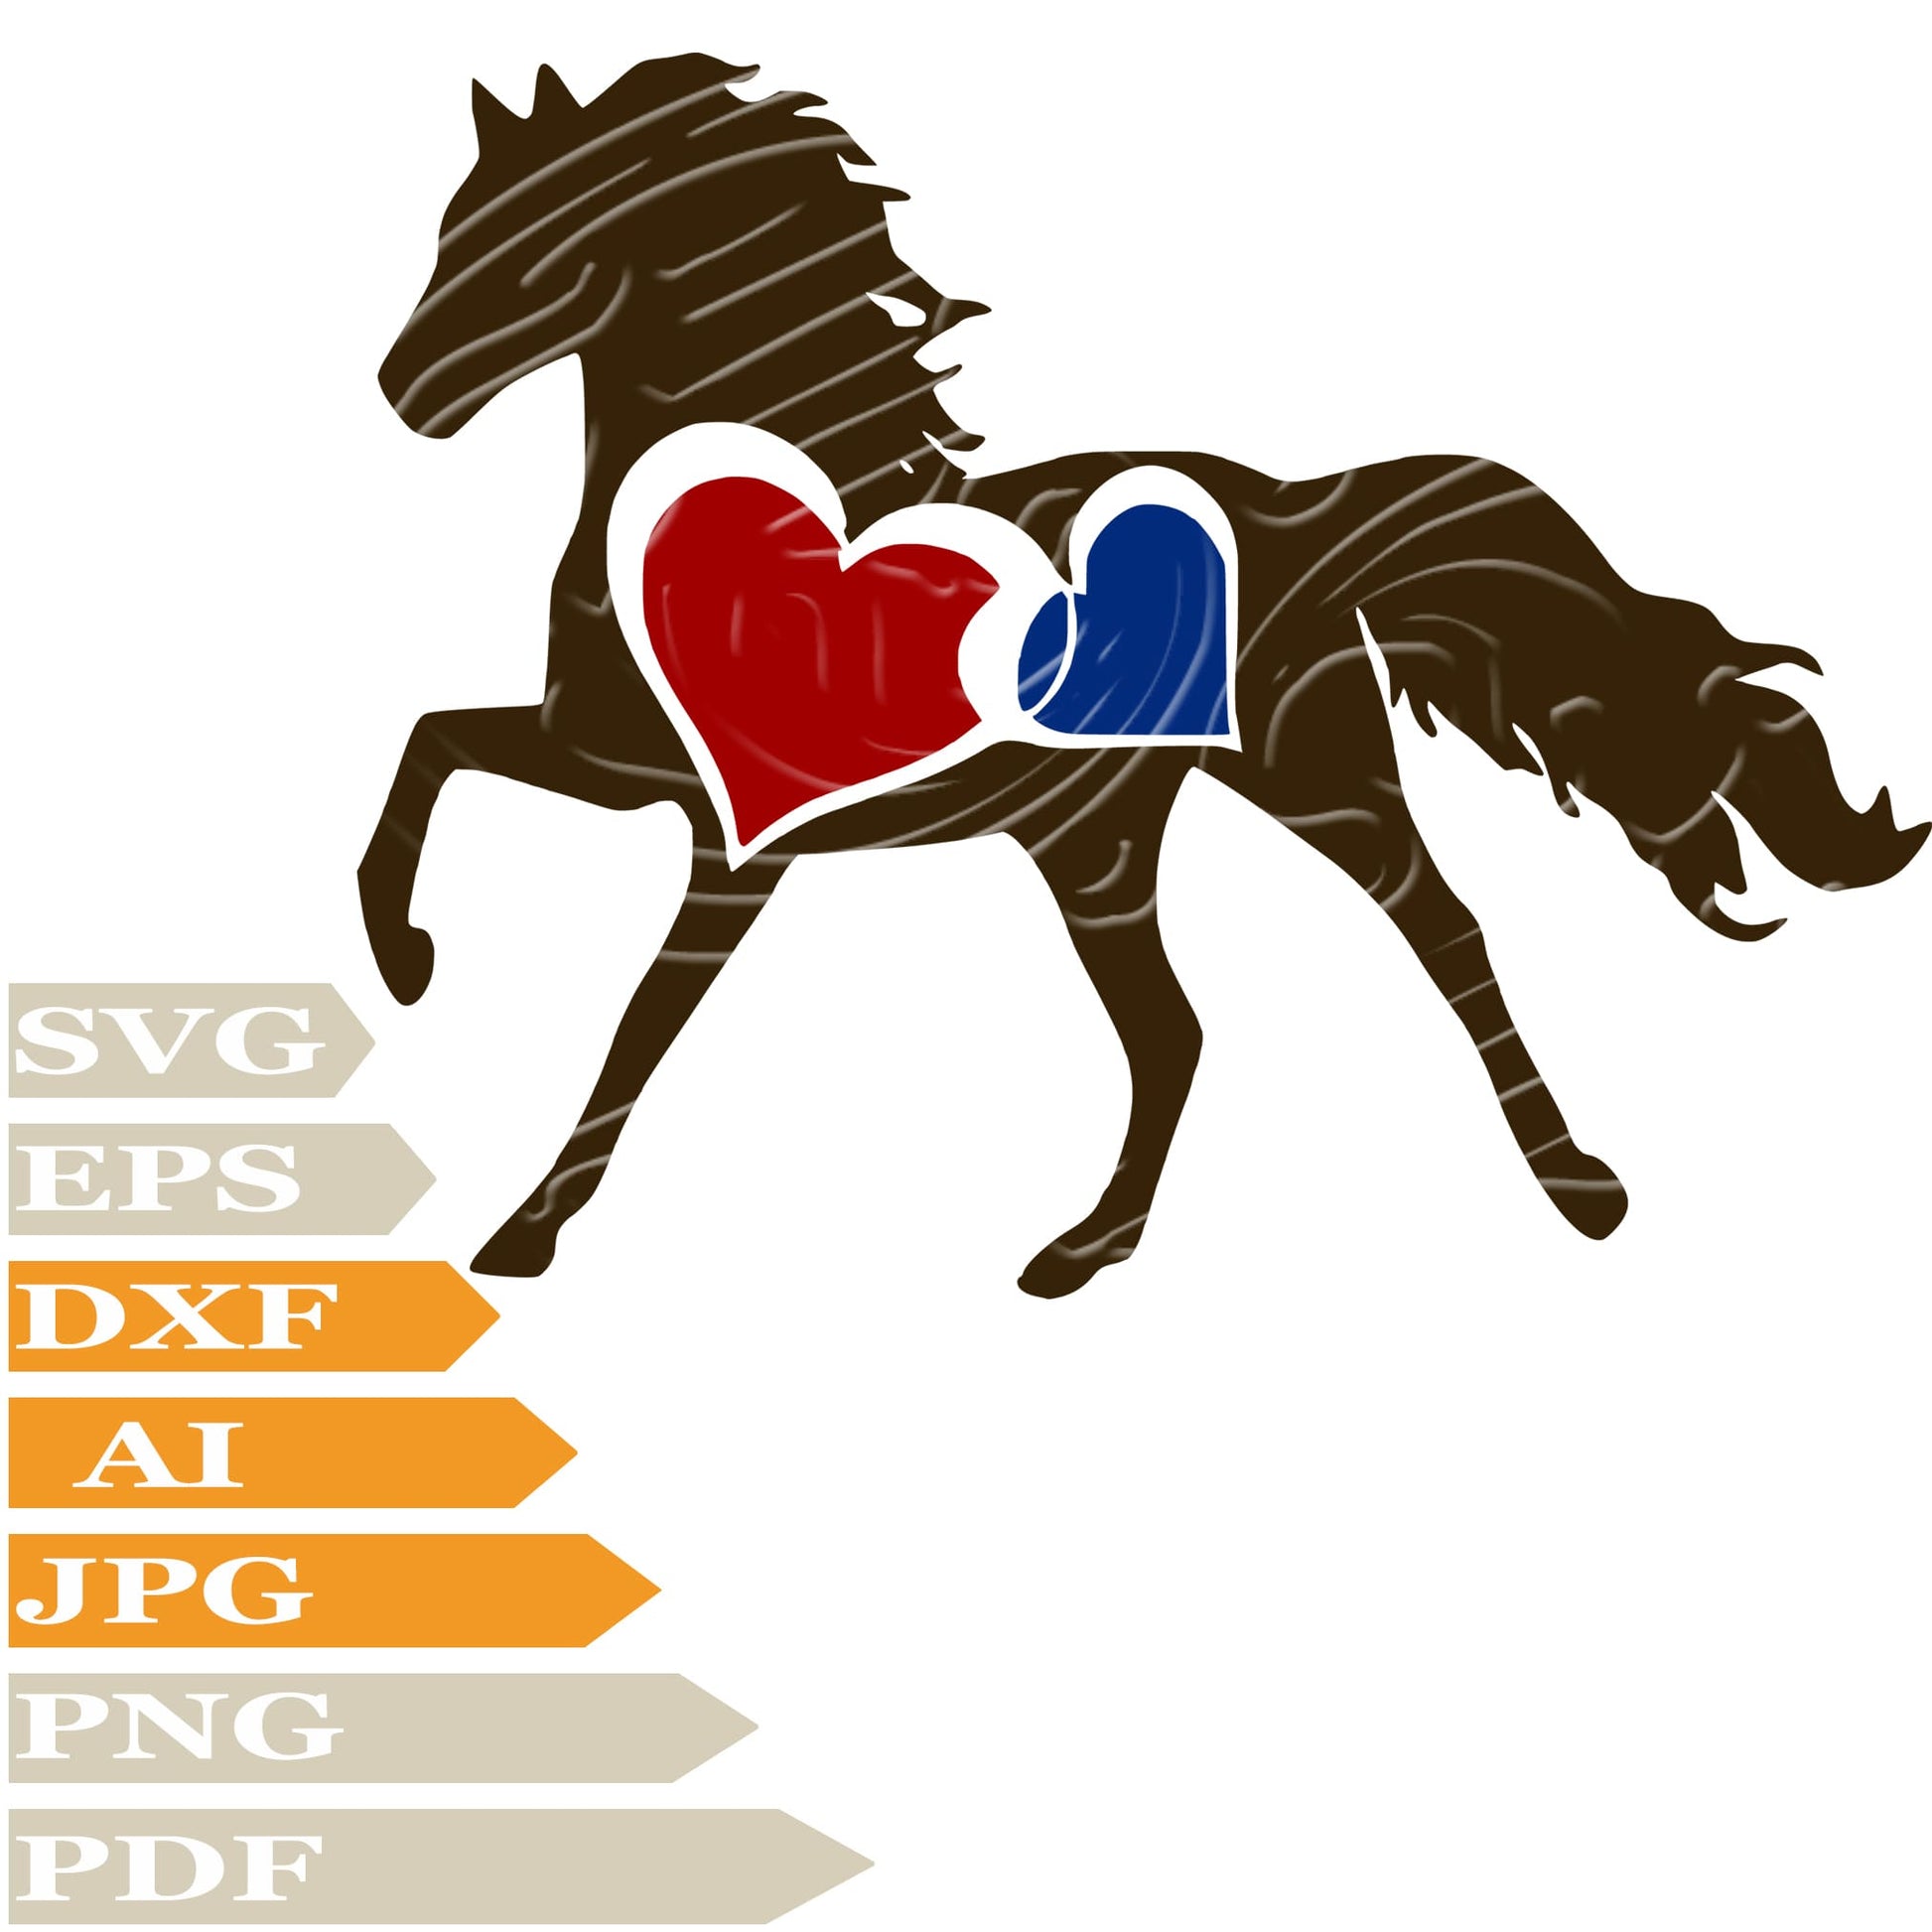 Horse, Heart, In Horse Svg File, Image Cut, Png, For Tattoo, Silhouette, Digital Vector Download, Cut File, Clipart, For Cricut